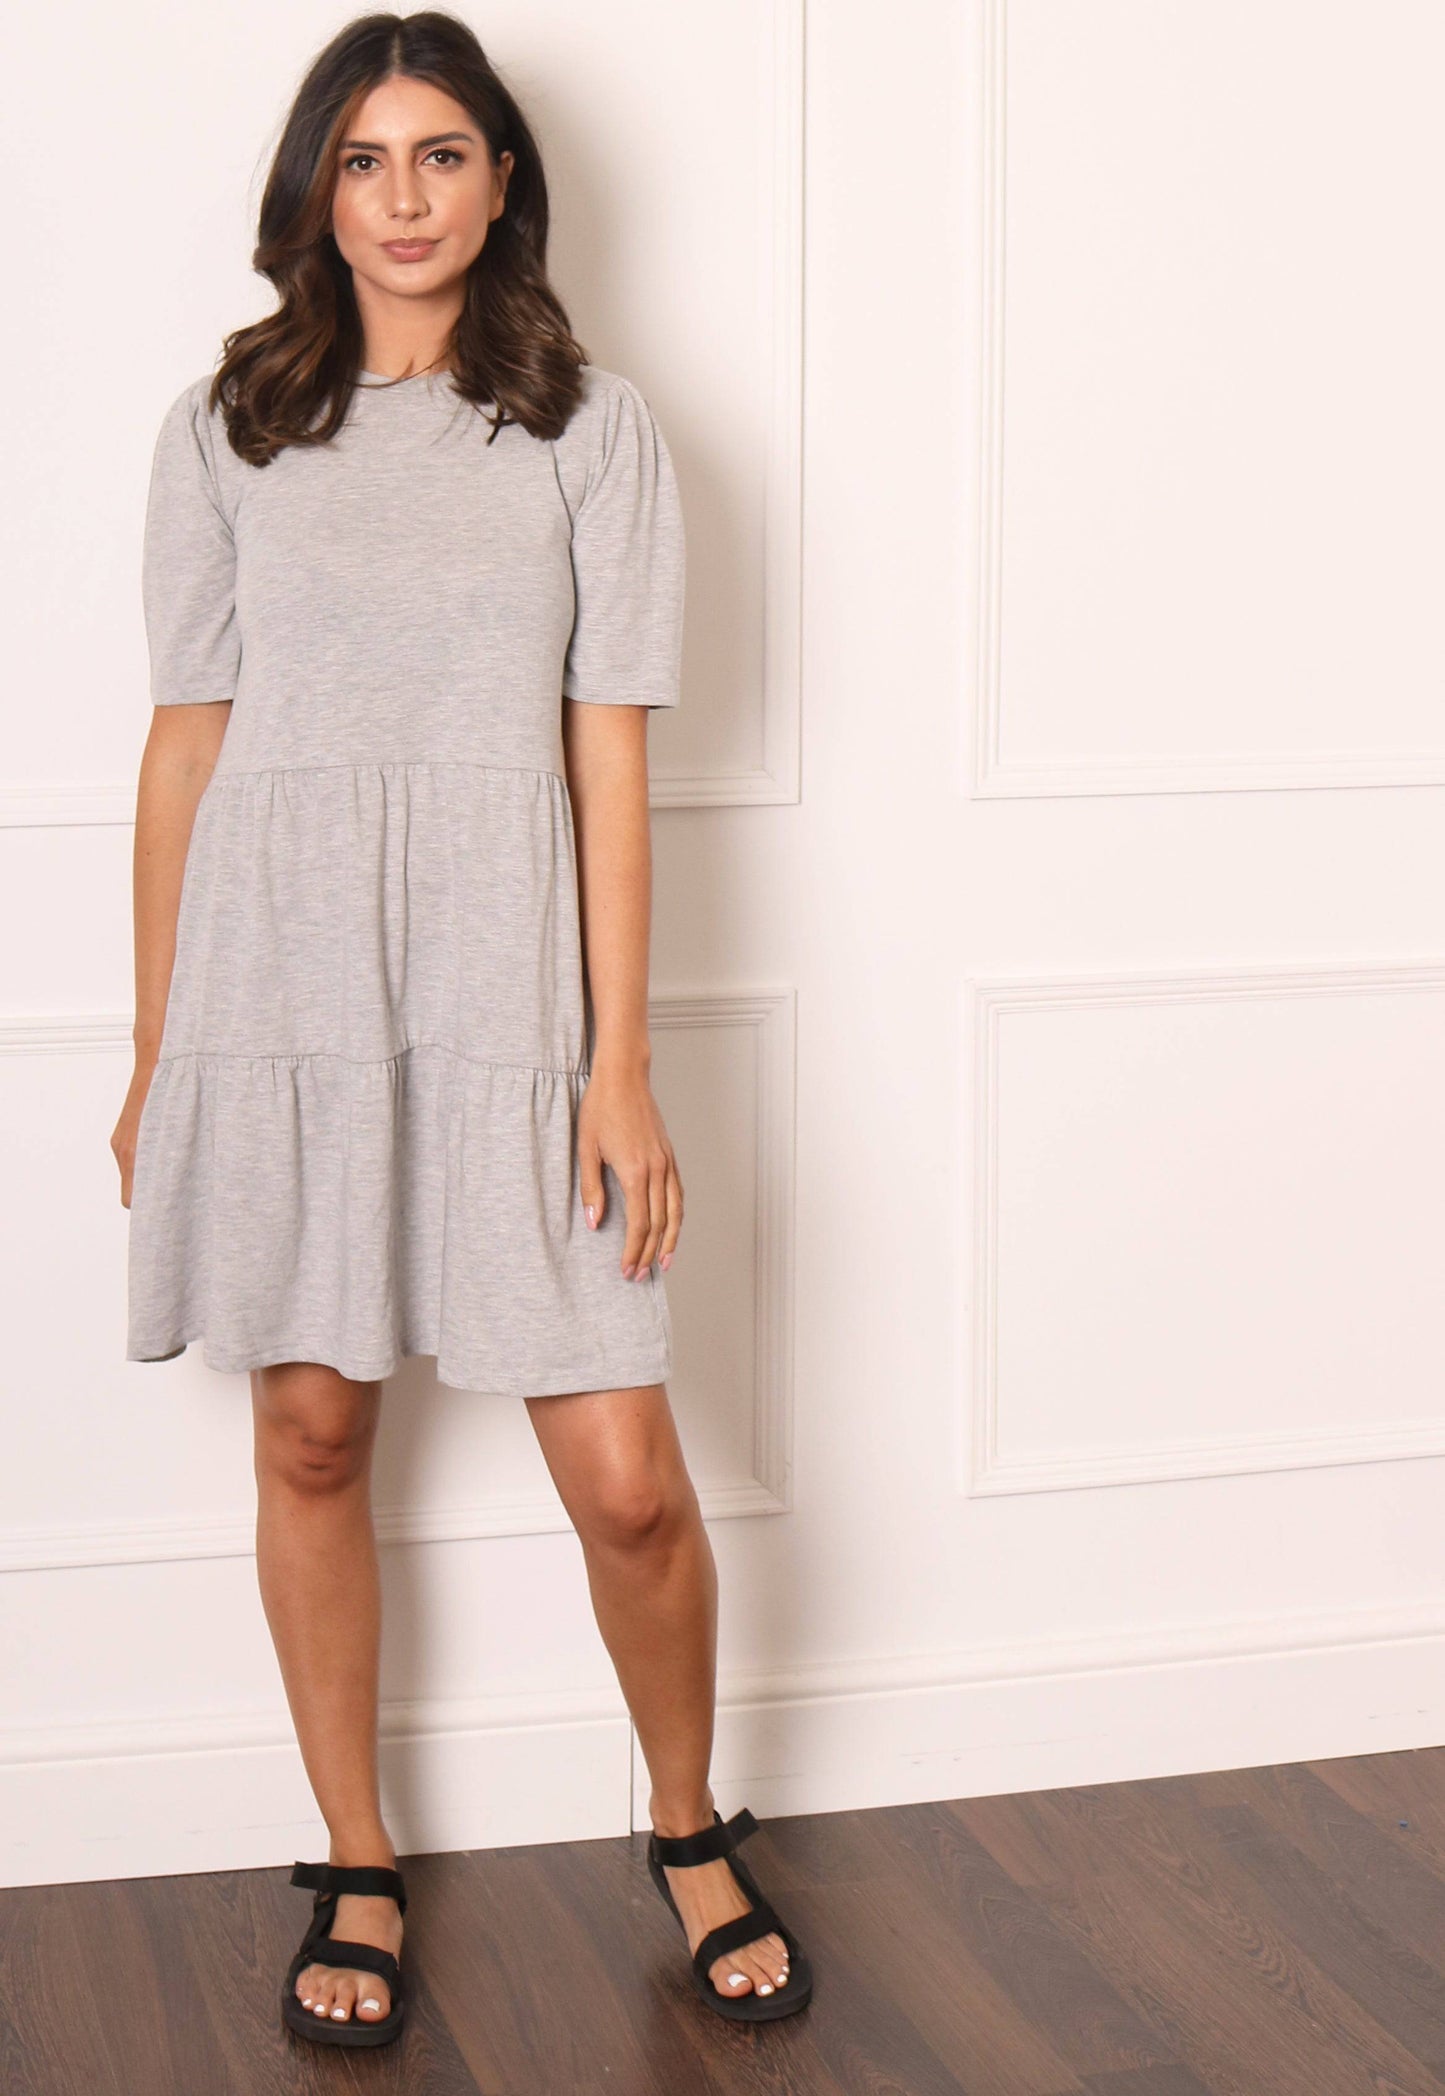 VILA Tiered Jersey Smock Mini Dress in Grey Marl - One Nation Clothing